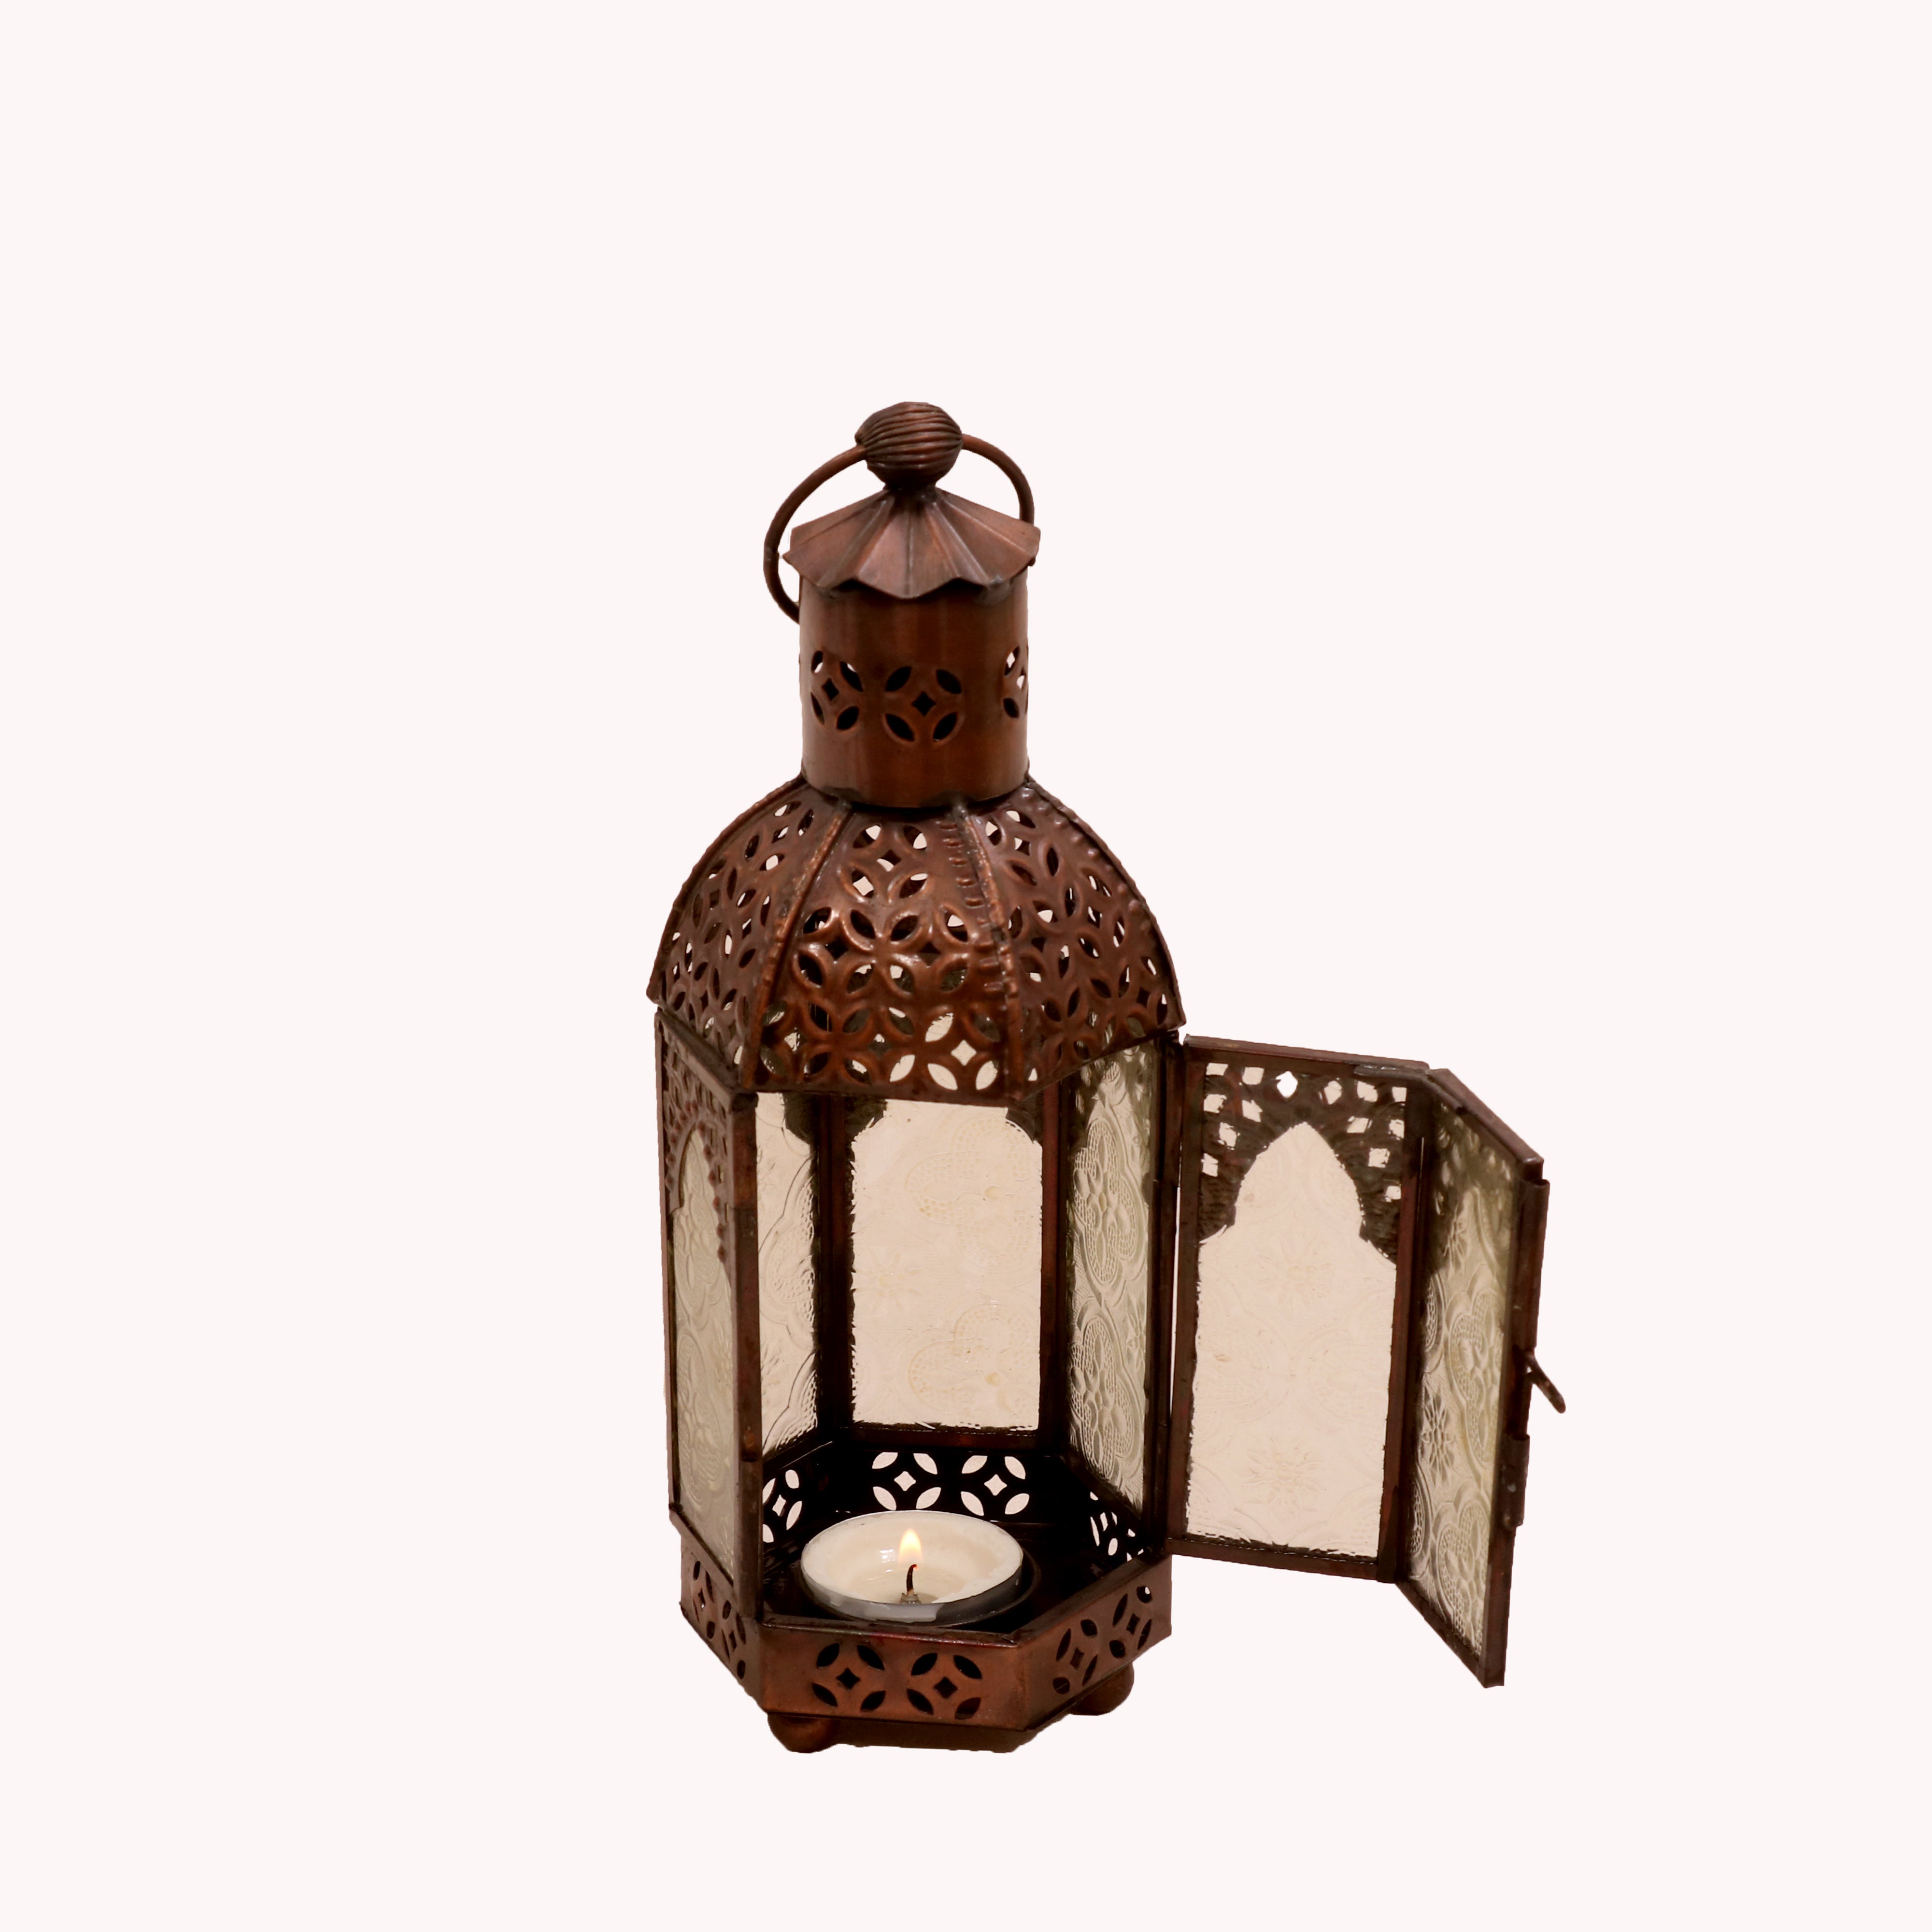 Intricate Lantern Candle Holder Candle Holder